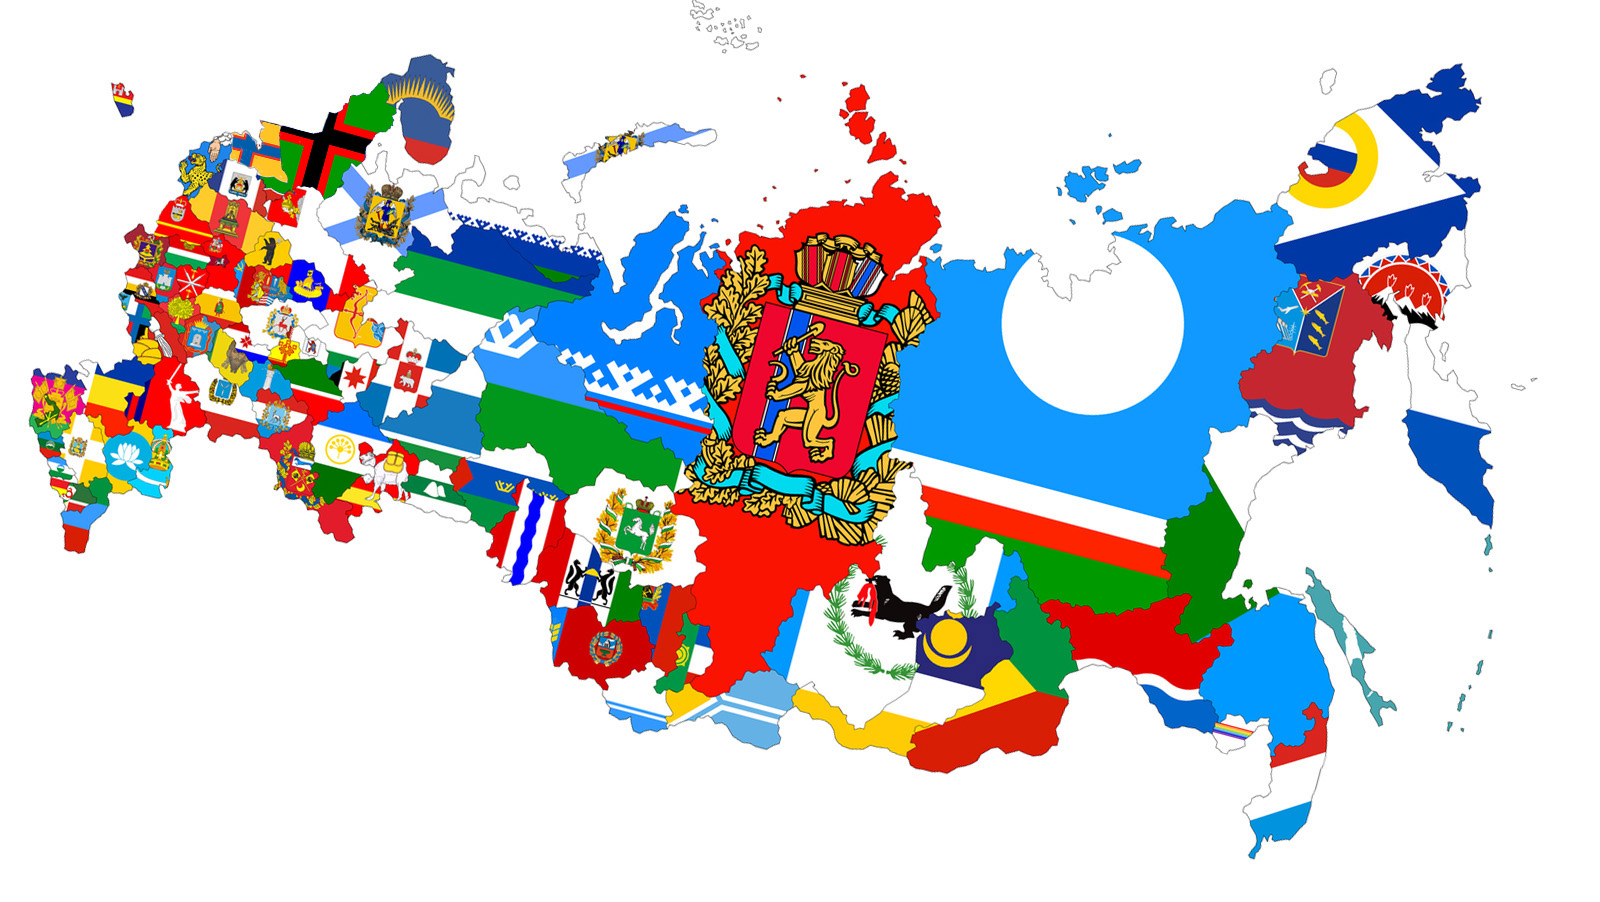 Regions Of The Russian Federation Image Afterempire.info  